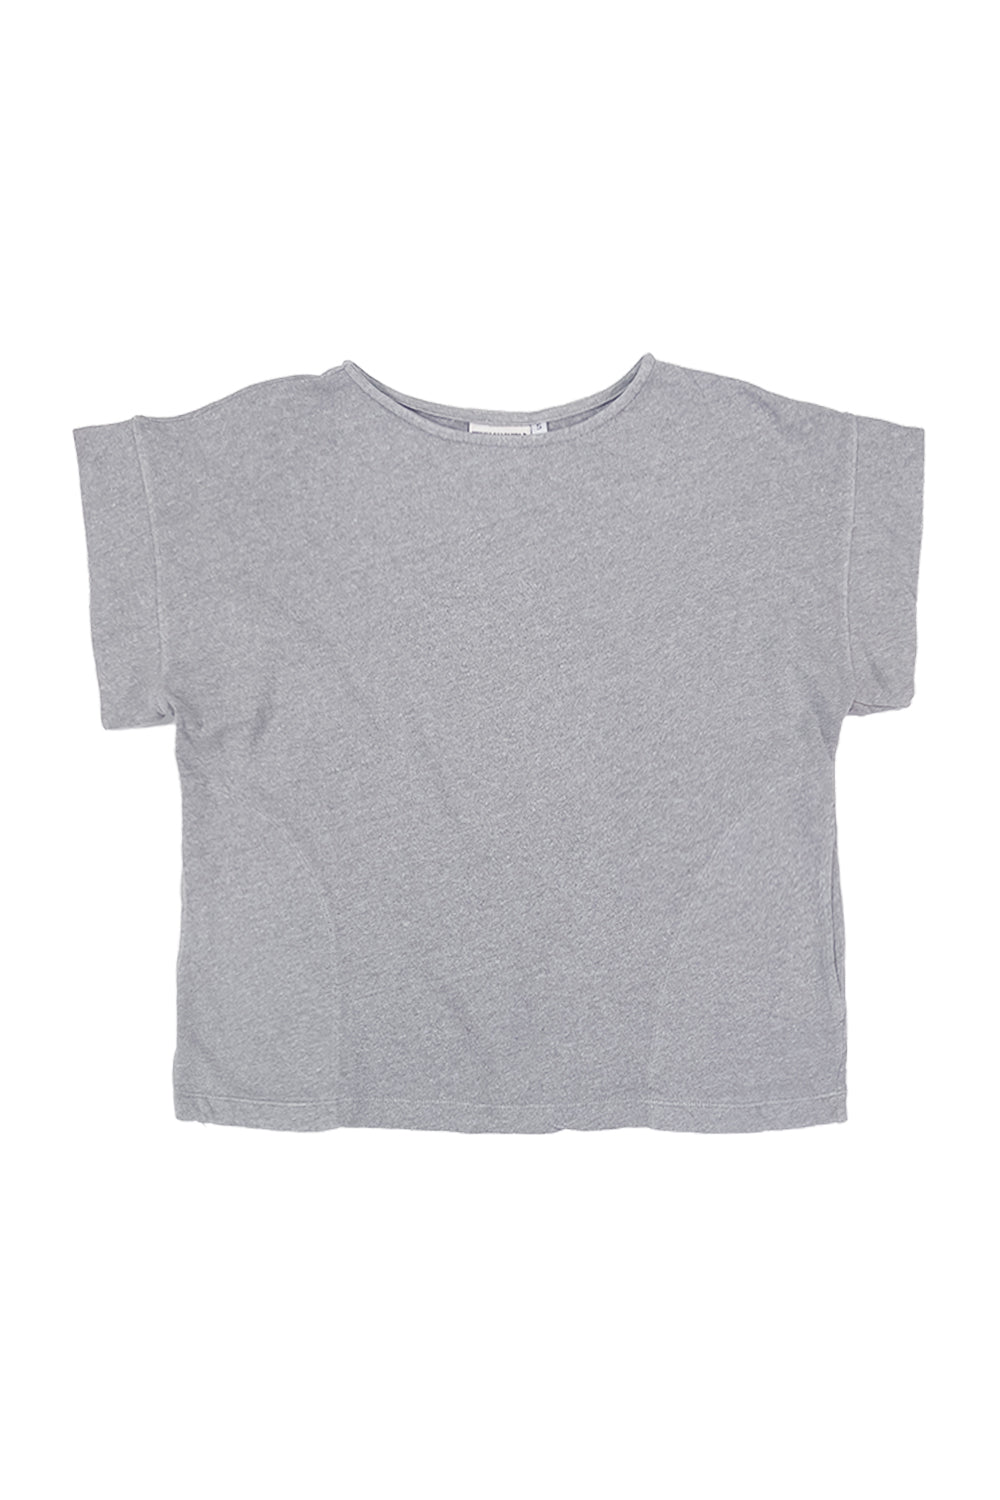 Heathered Taos Top | Jungmaven Hemp Clothing & Accessories / Color: Athletic Gray